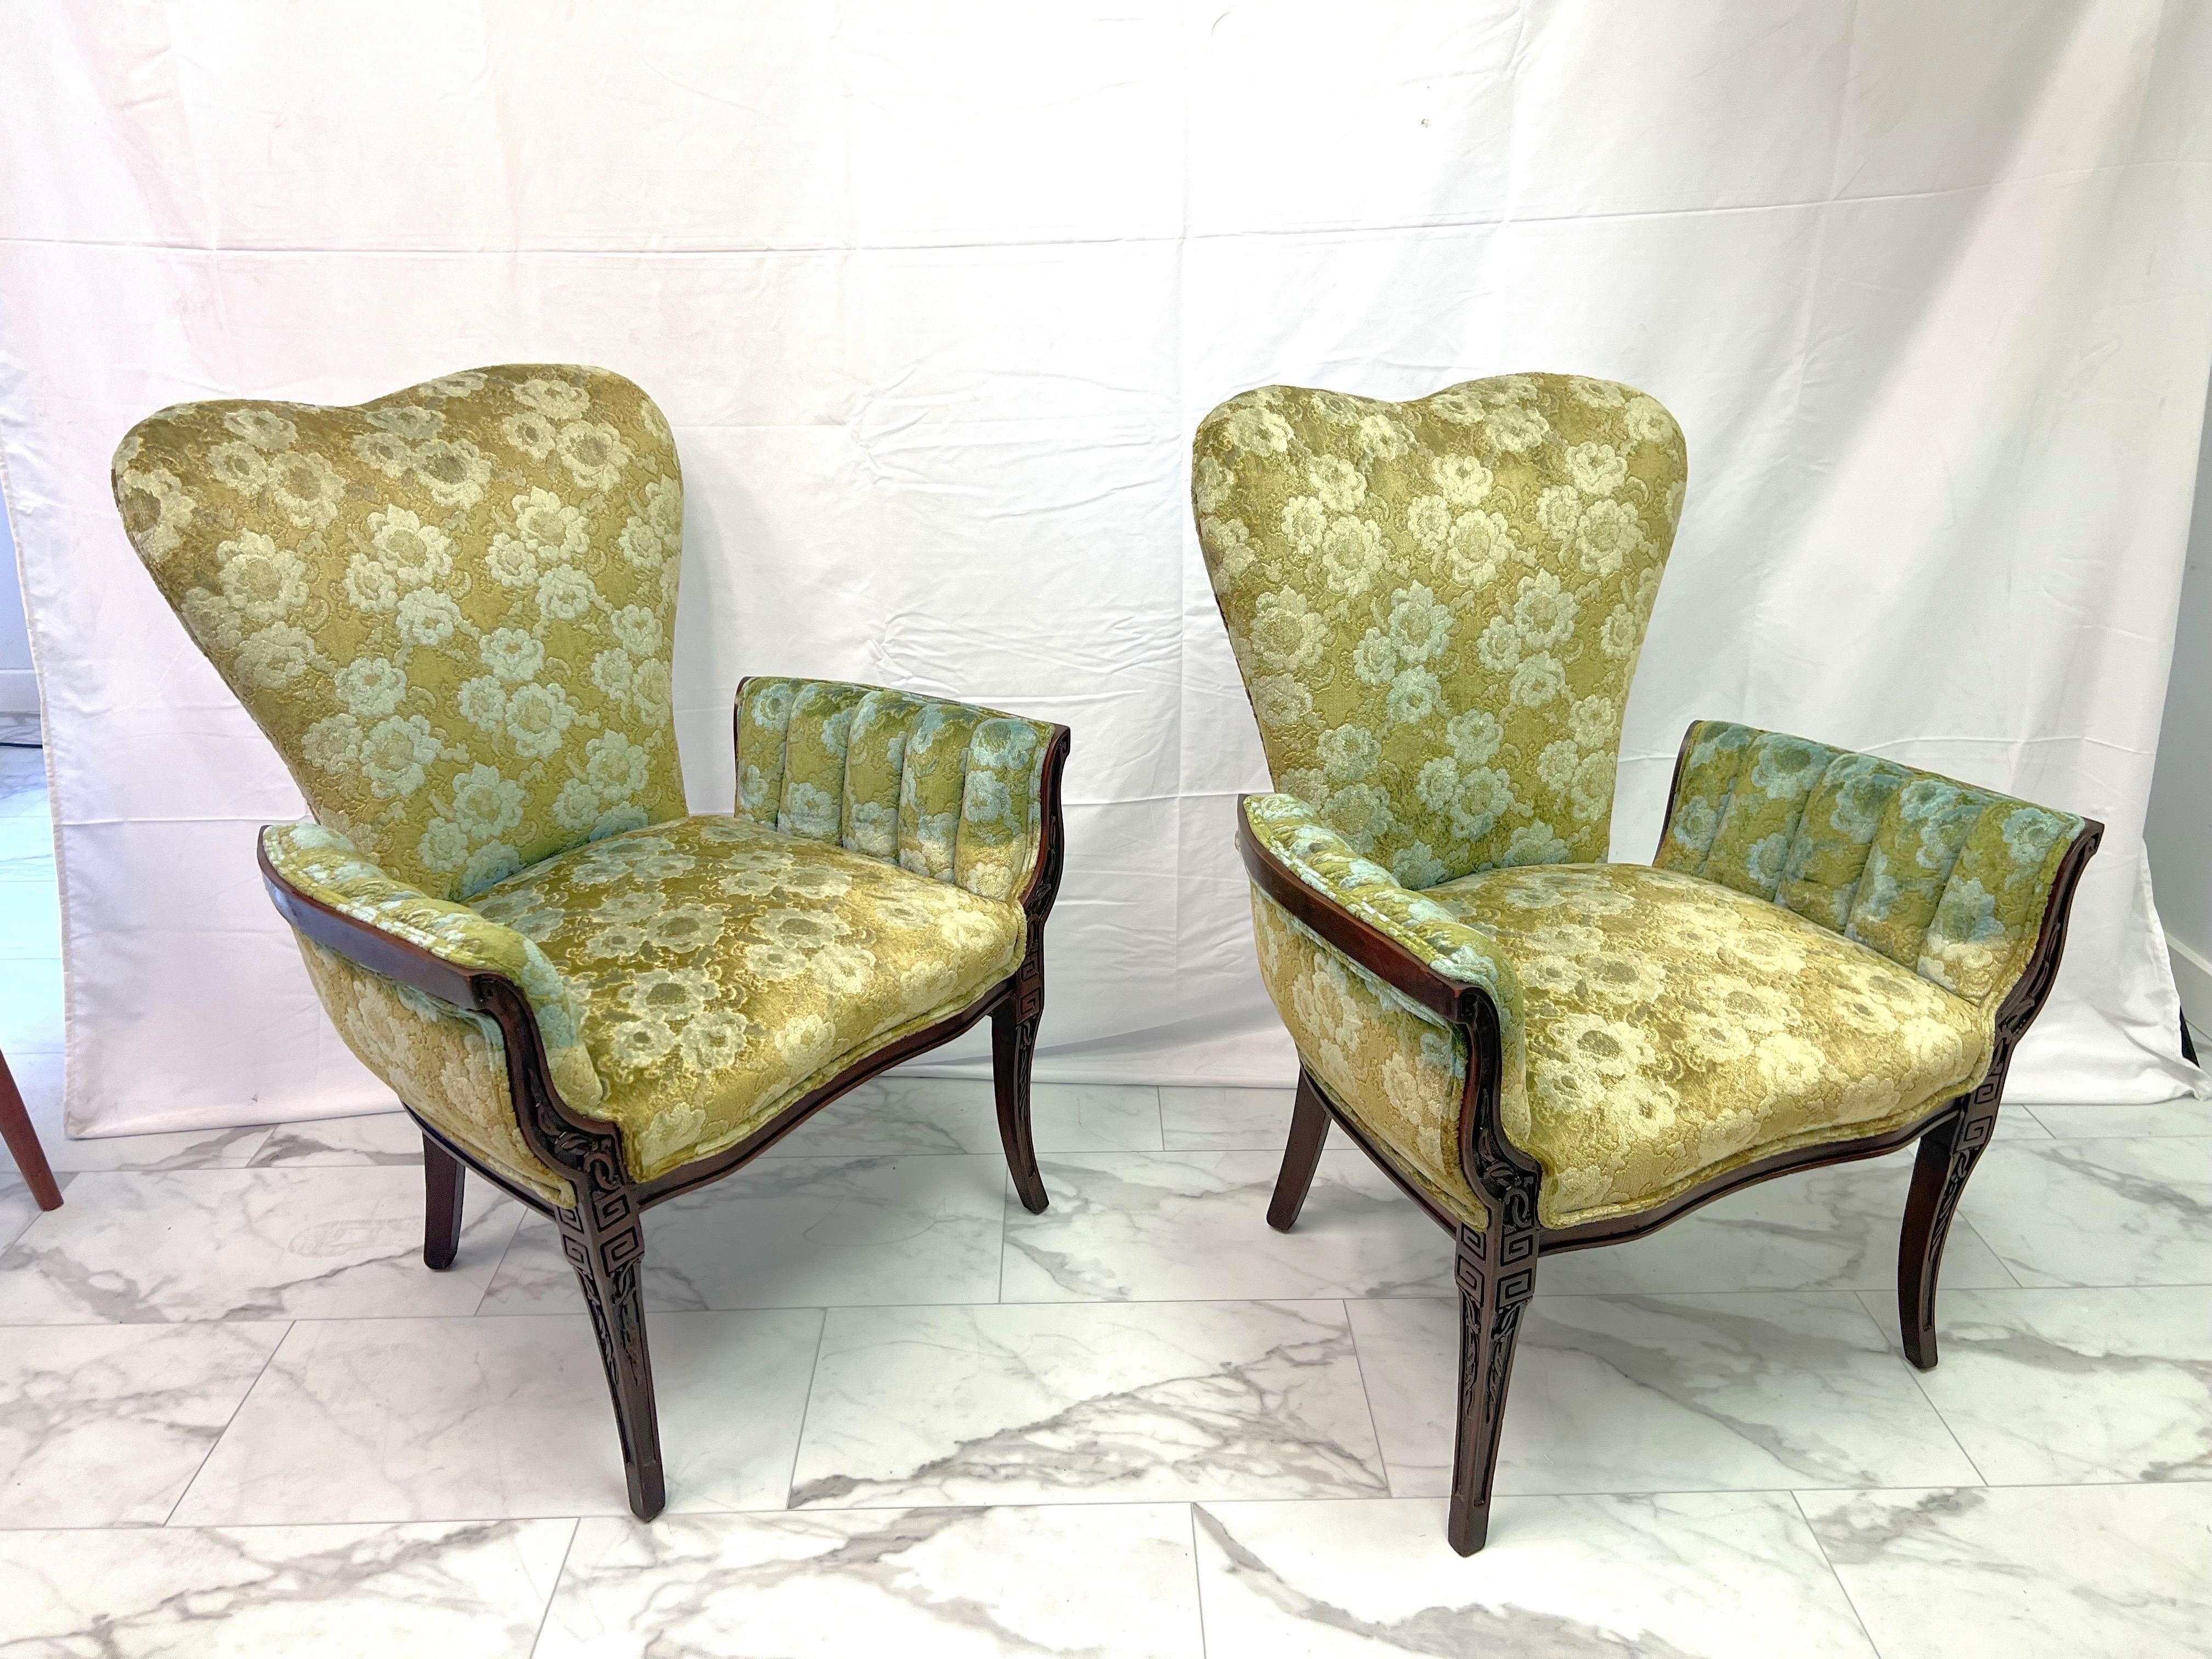 Mid-20th Century Grosfeld House Attributed Fireside Chairs in Green Floral Upholstery - a Pair For Sale